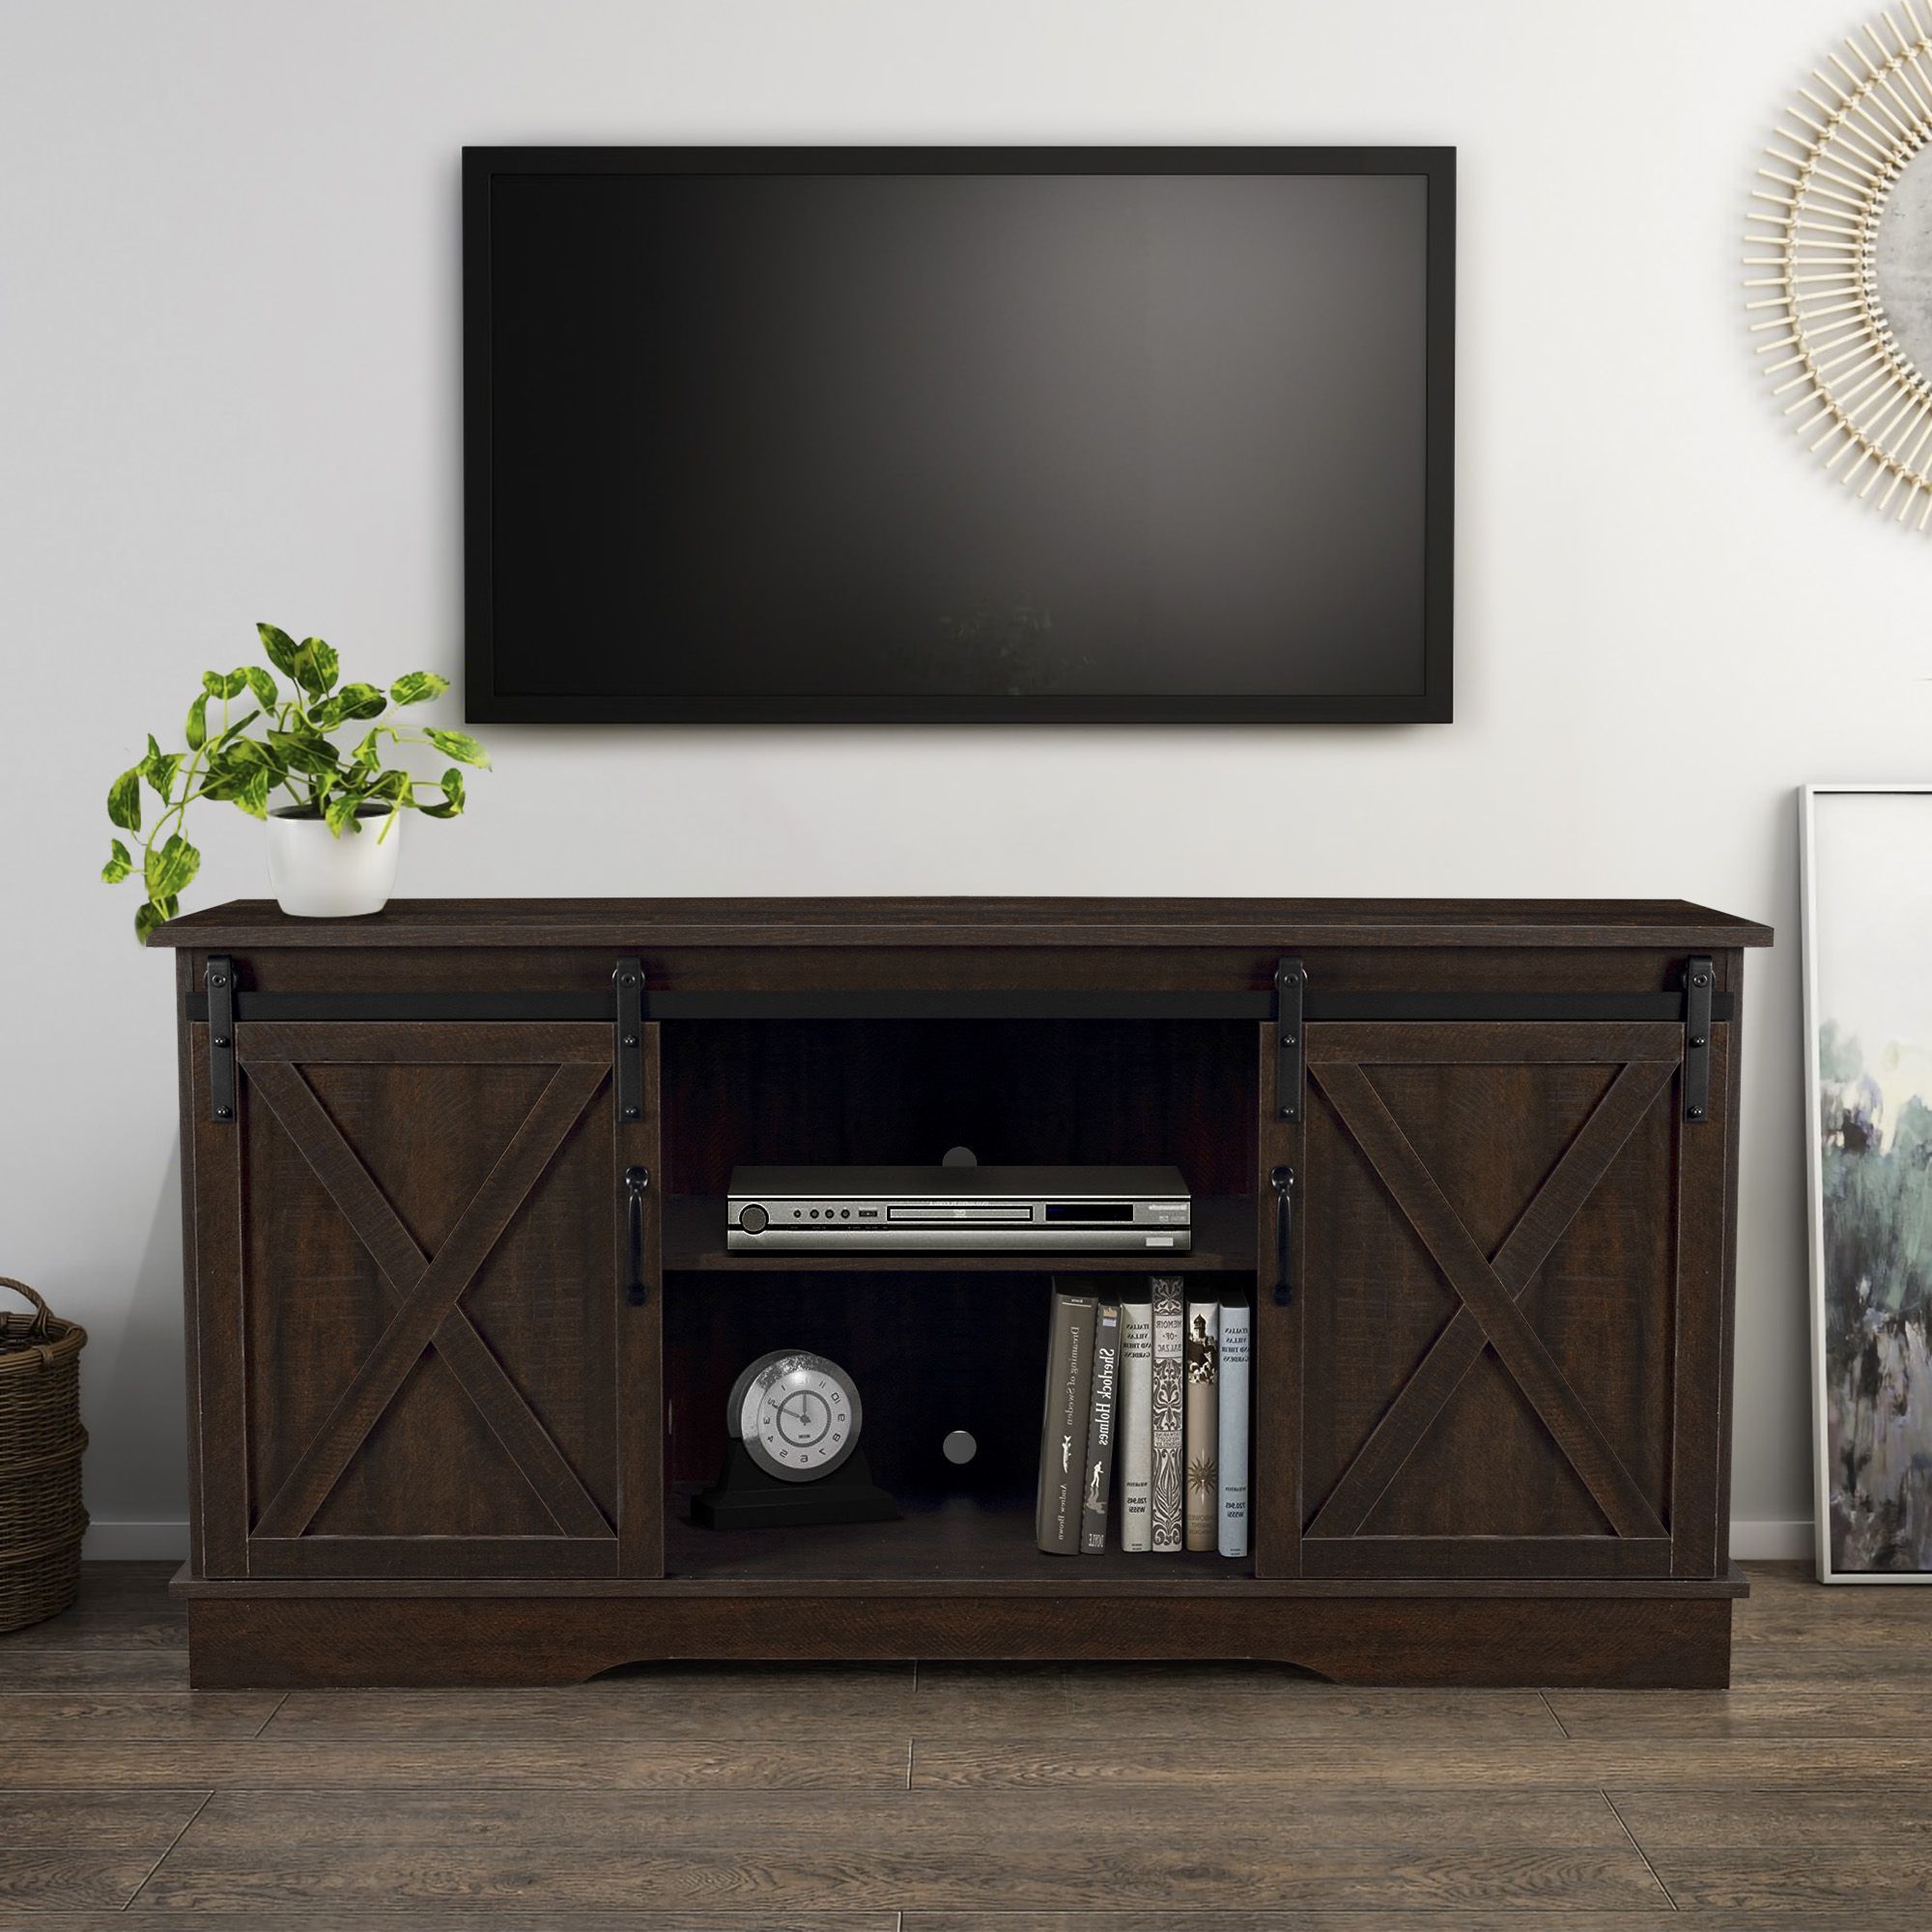 Belleze Modern Farmhouse Style 58 Inch Tv Stand With Pertaining To Modern Black Tabletop Tv Stands (Gallery 8 of 20)